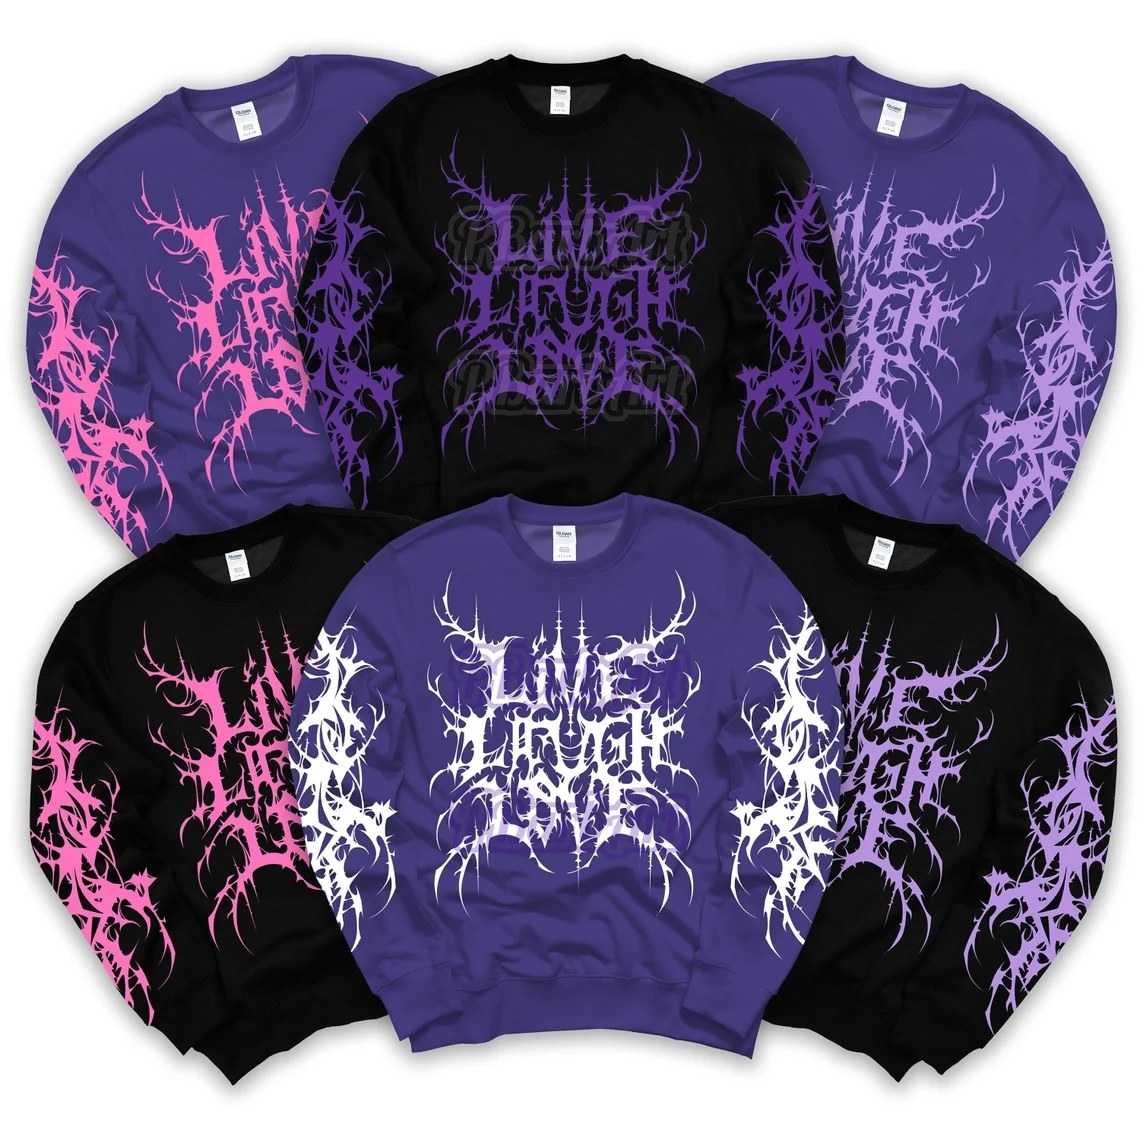 long sleeve shirts that say live laugh love in metal script